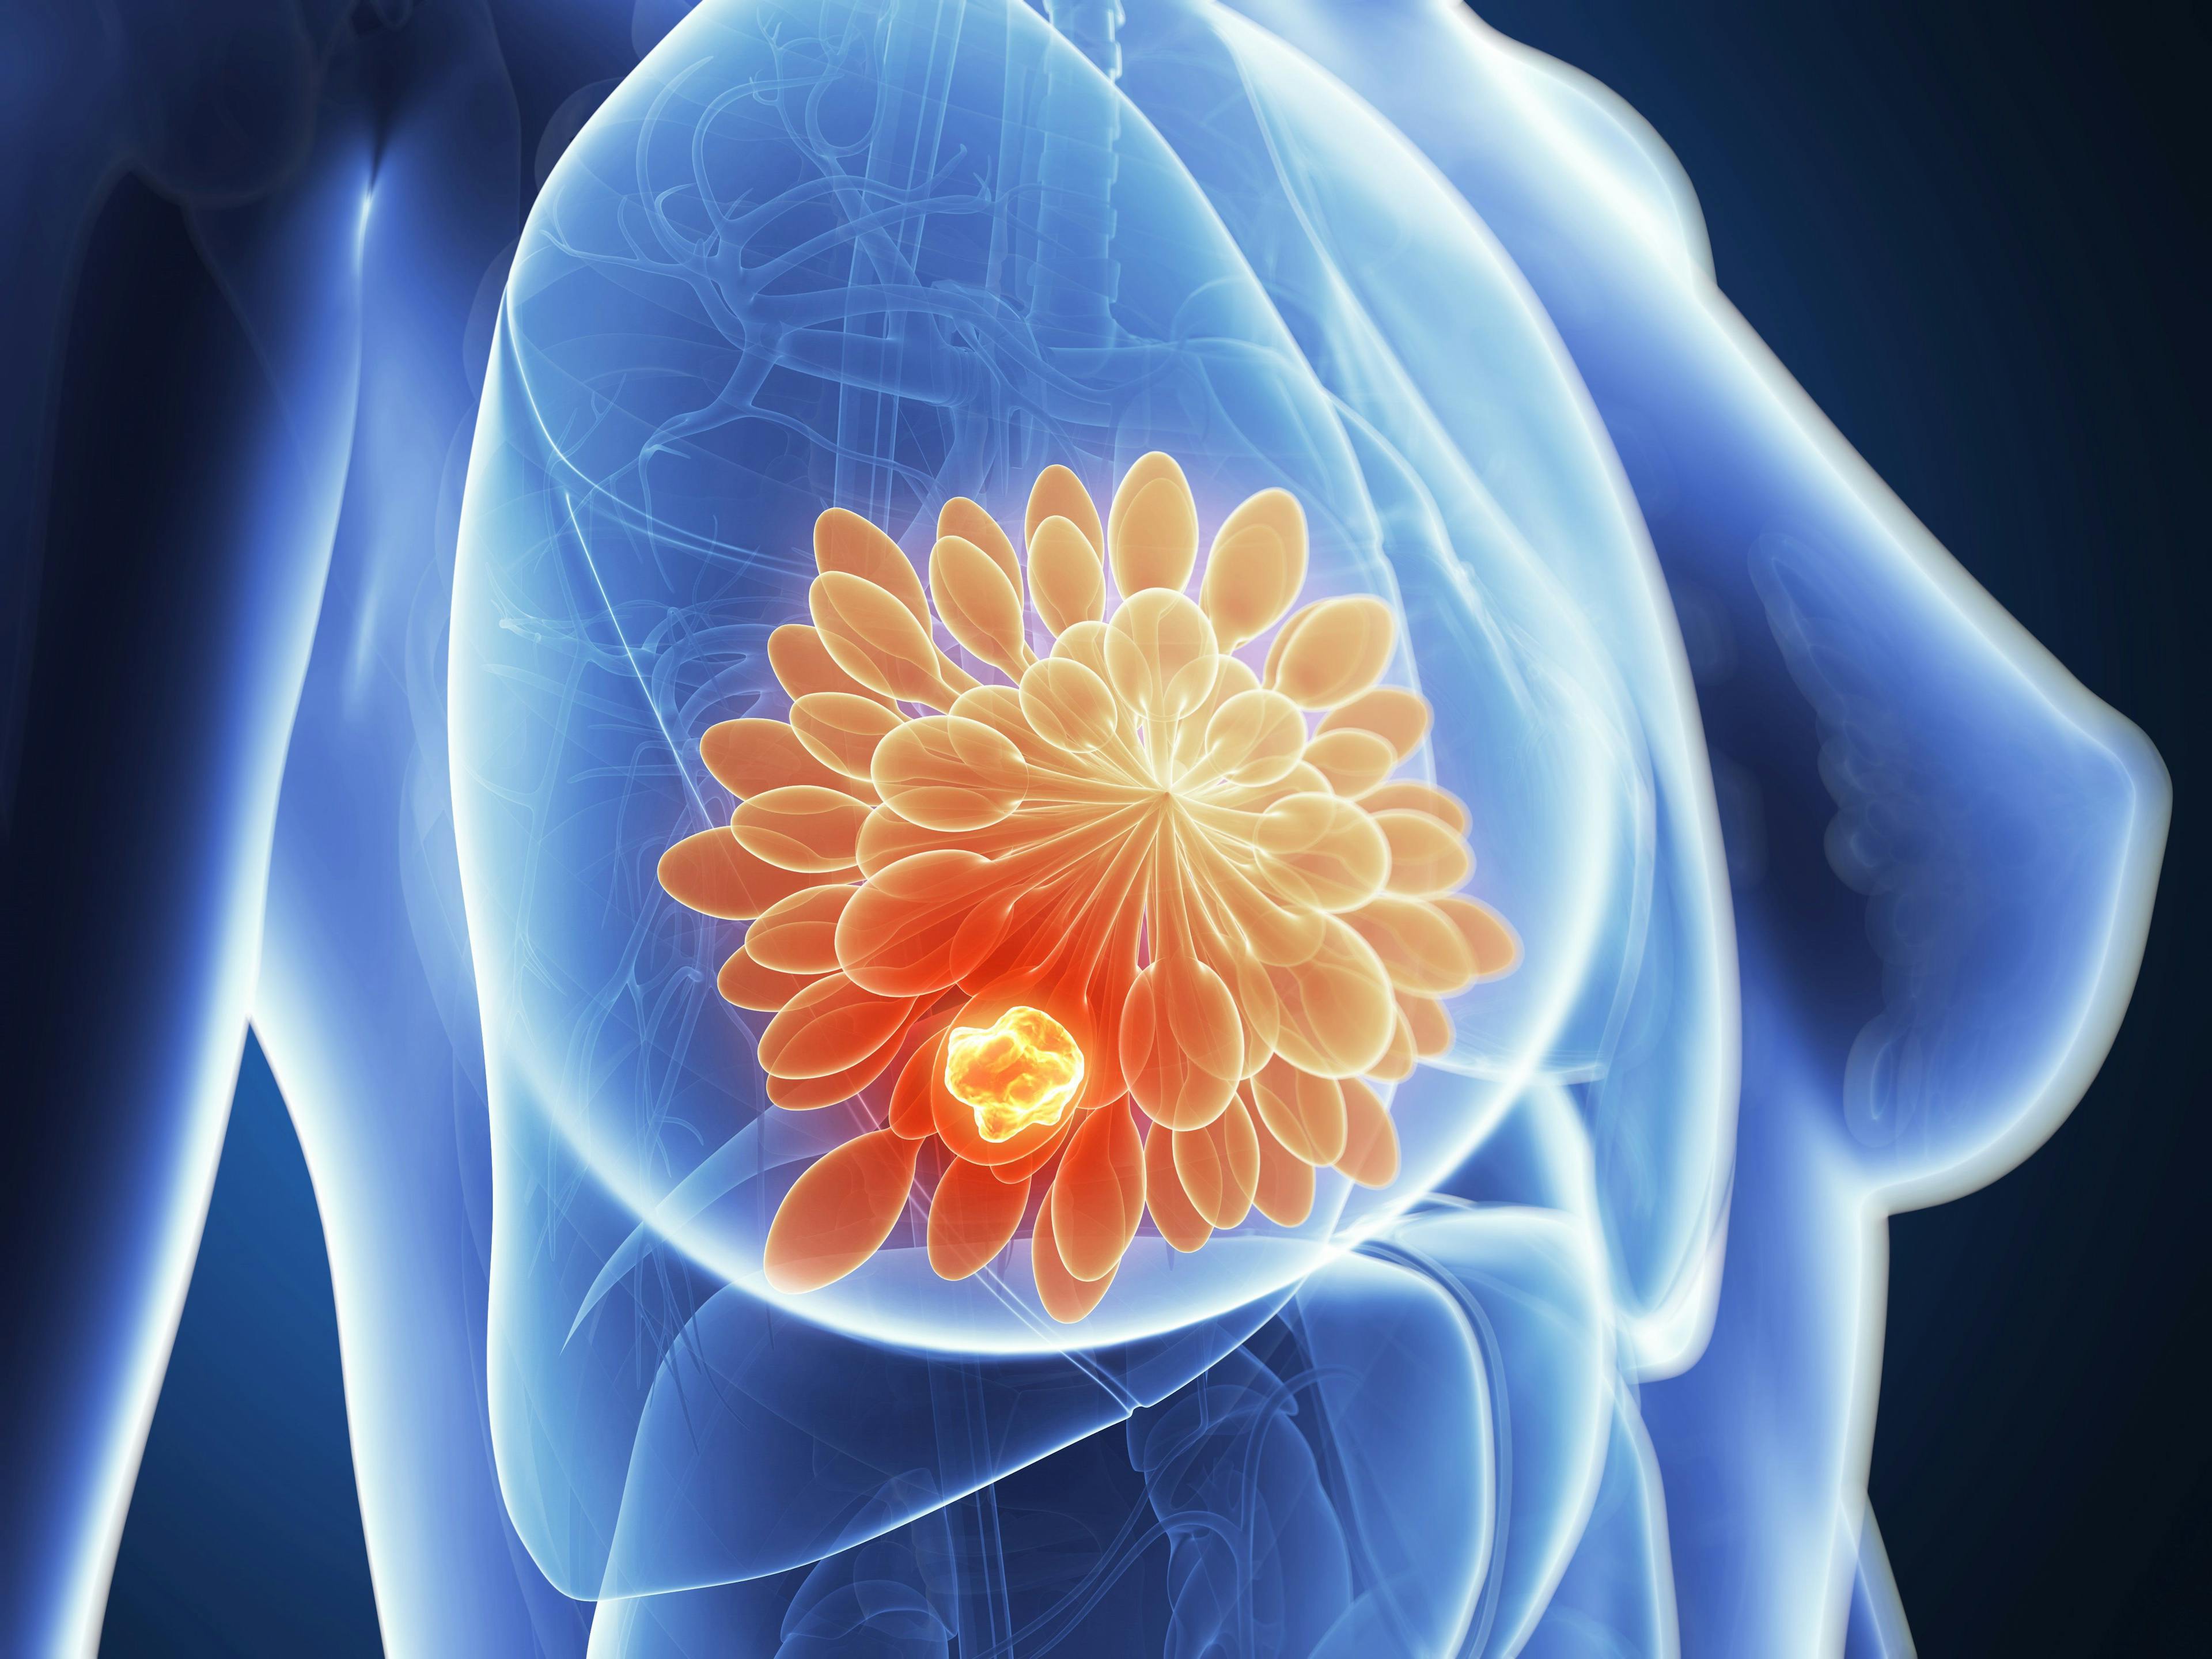 Personalized Blood Test Improves MRD Detection in Patients with Breast Cancer